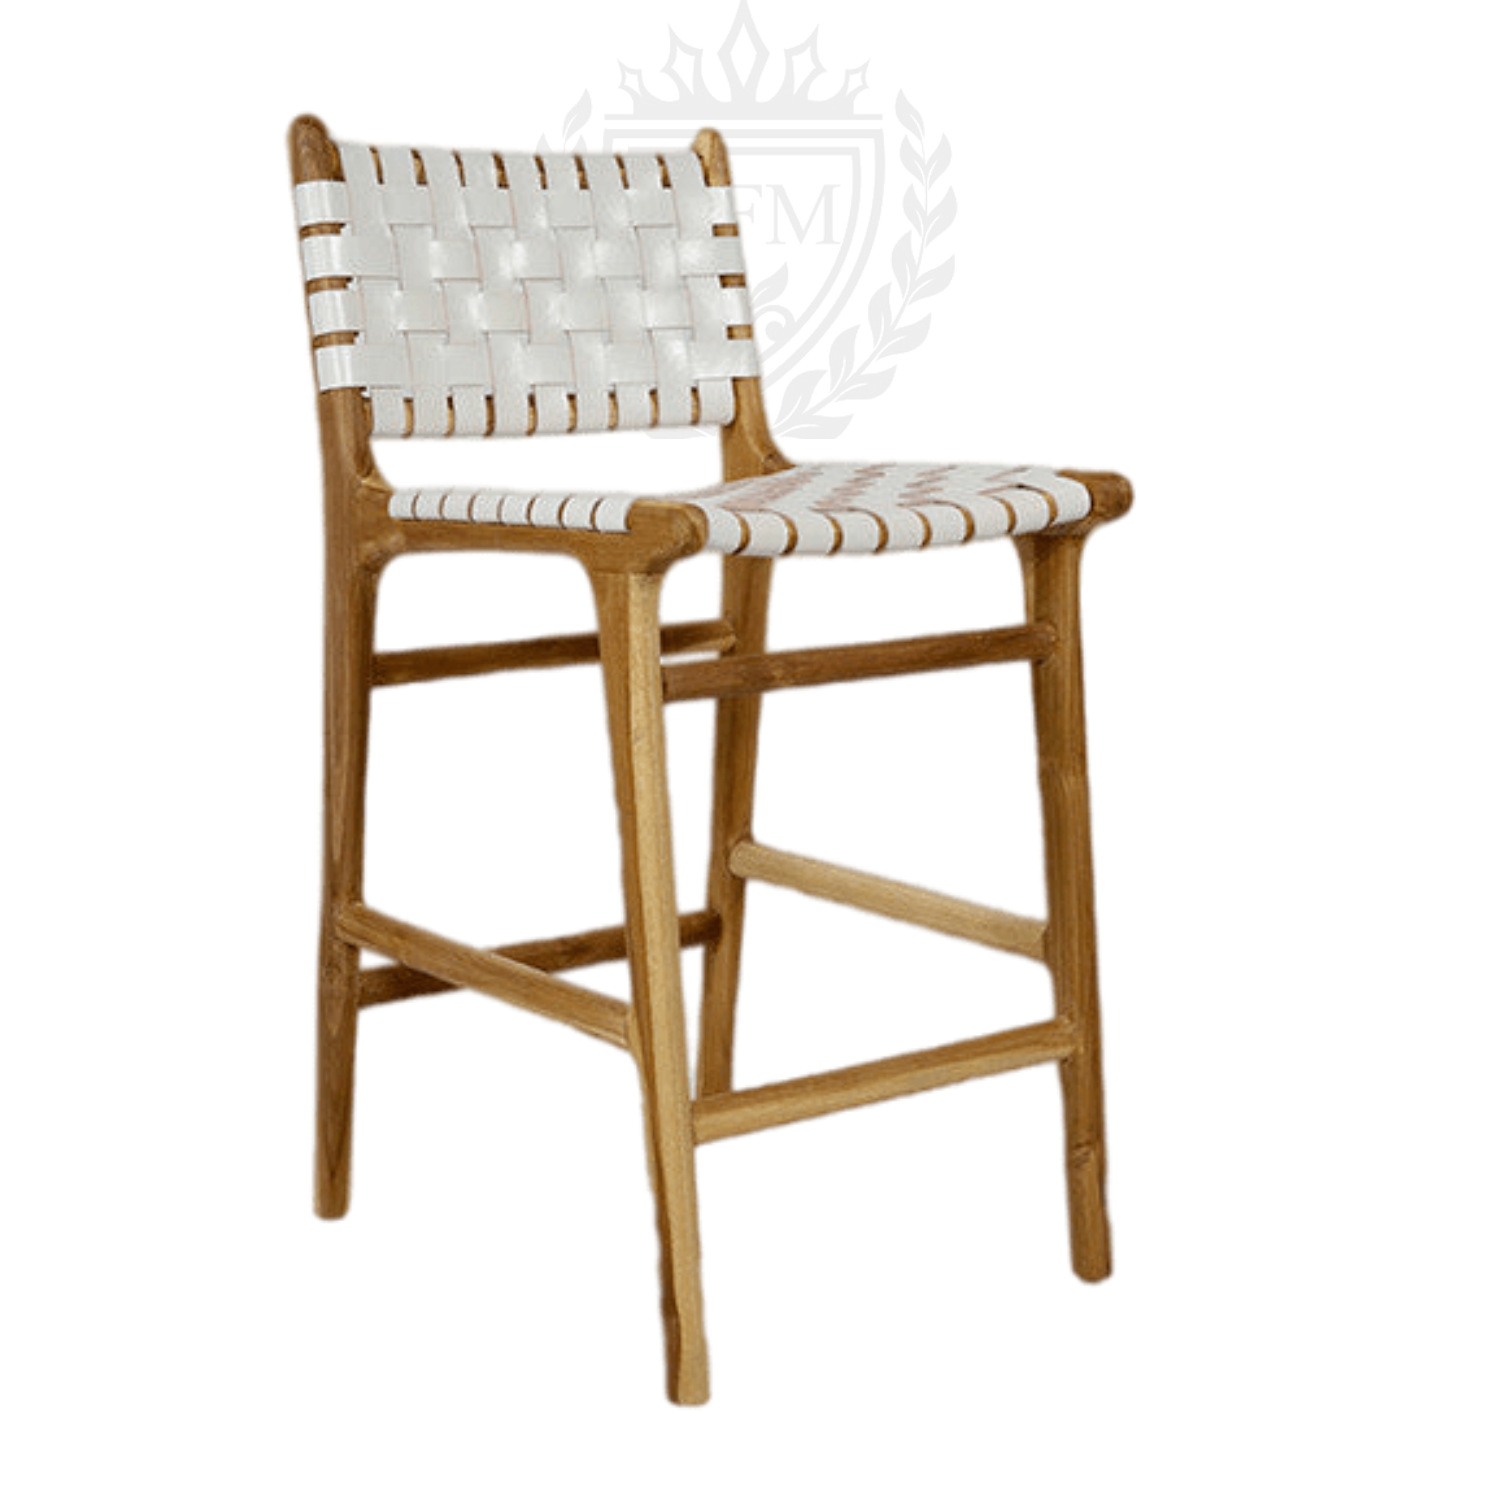 Handcrafted Wood and Genuine Leather Woven Bar Chair | Moroccan Artisanal Design